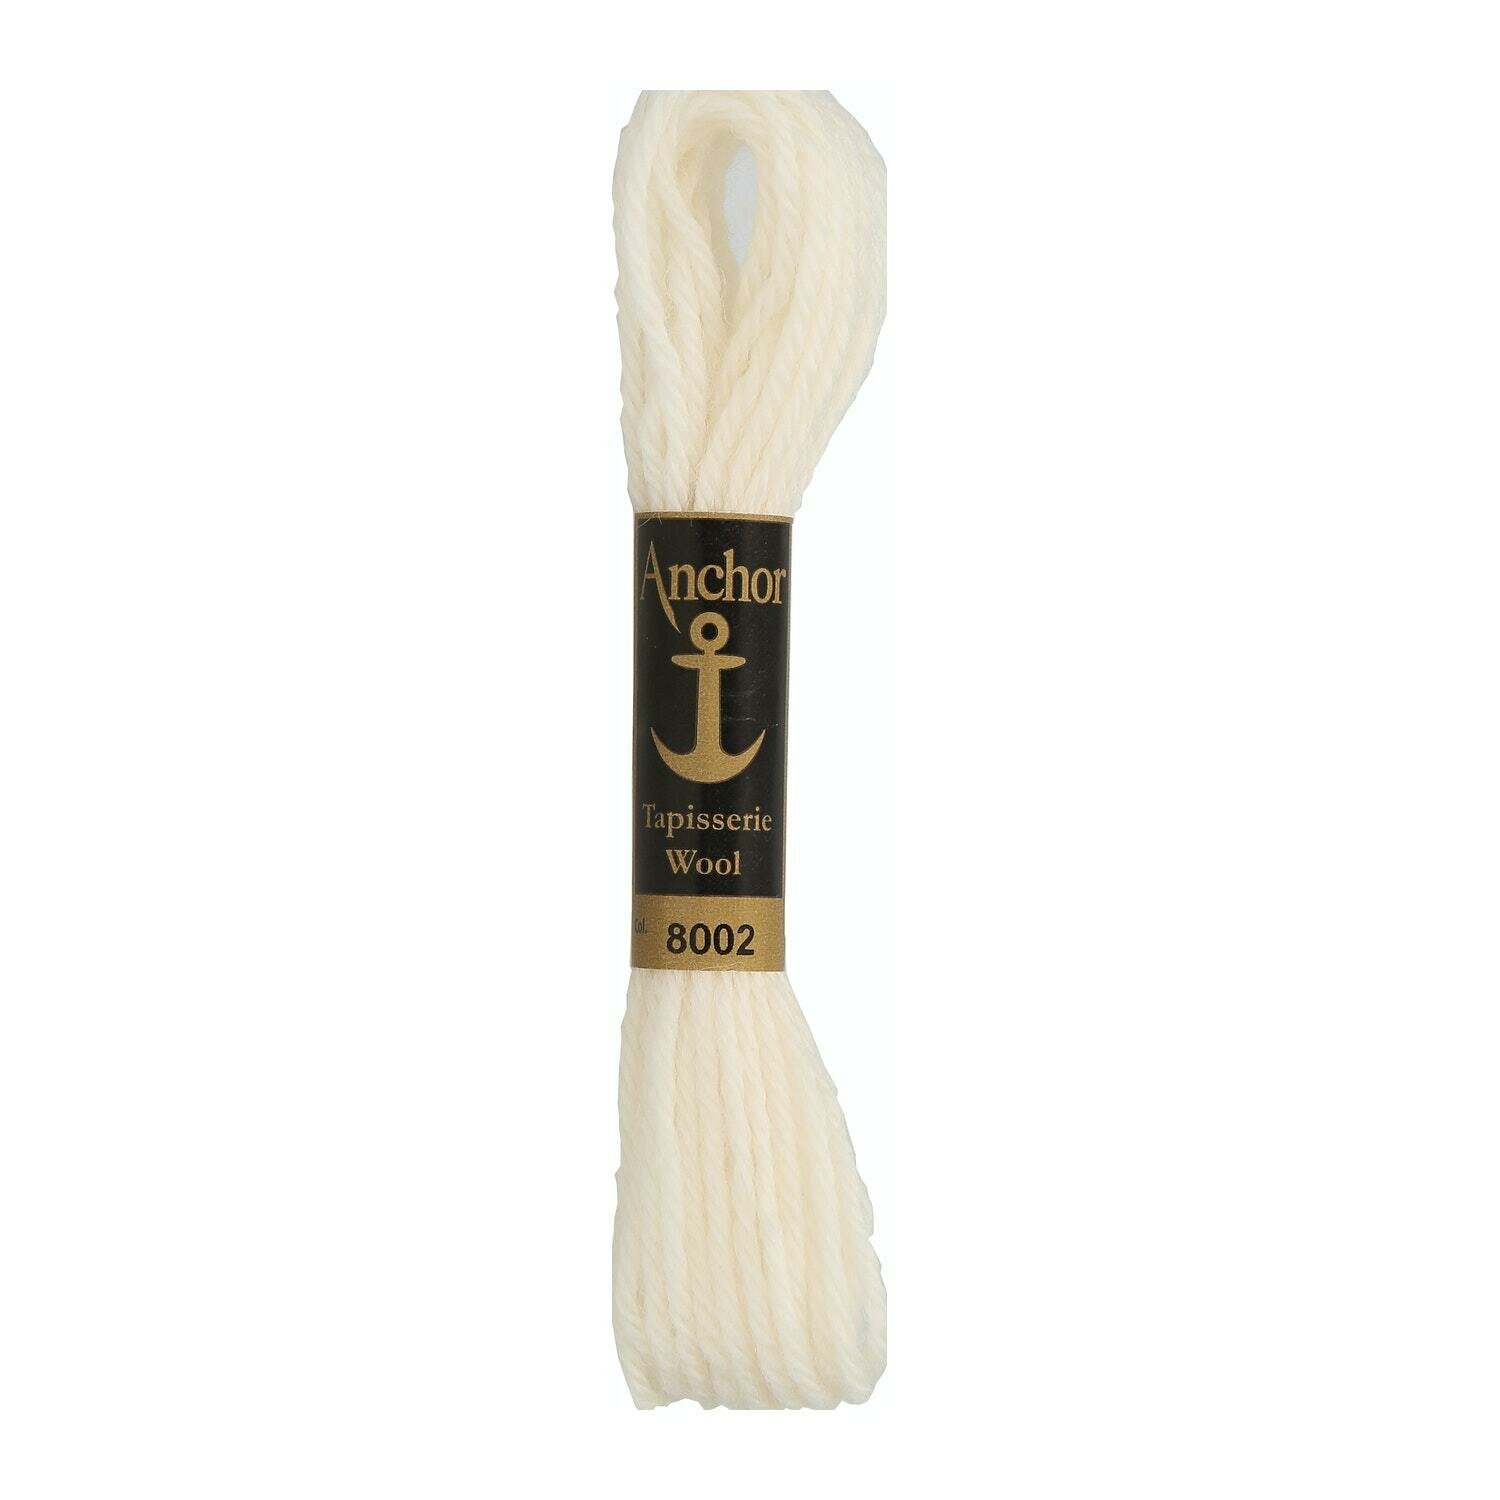 Anchor Tapisserie Wool # 08002